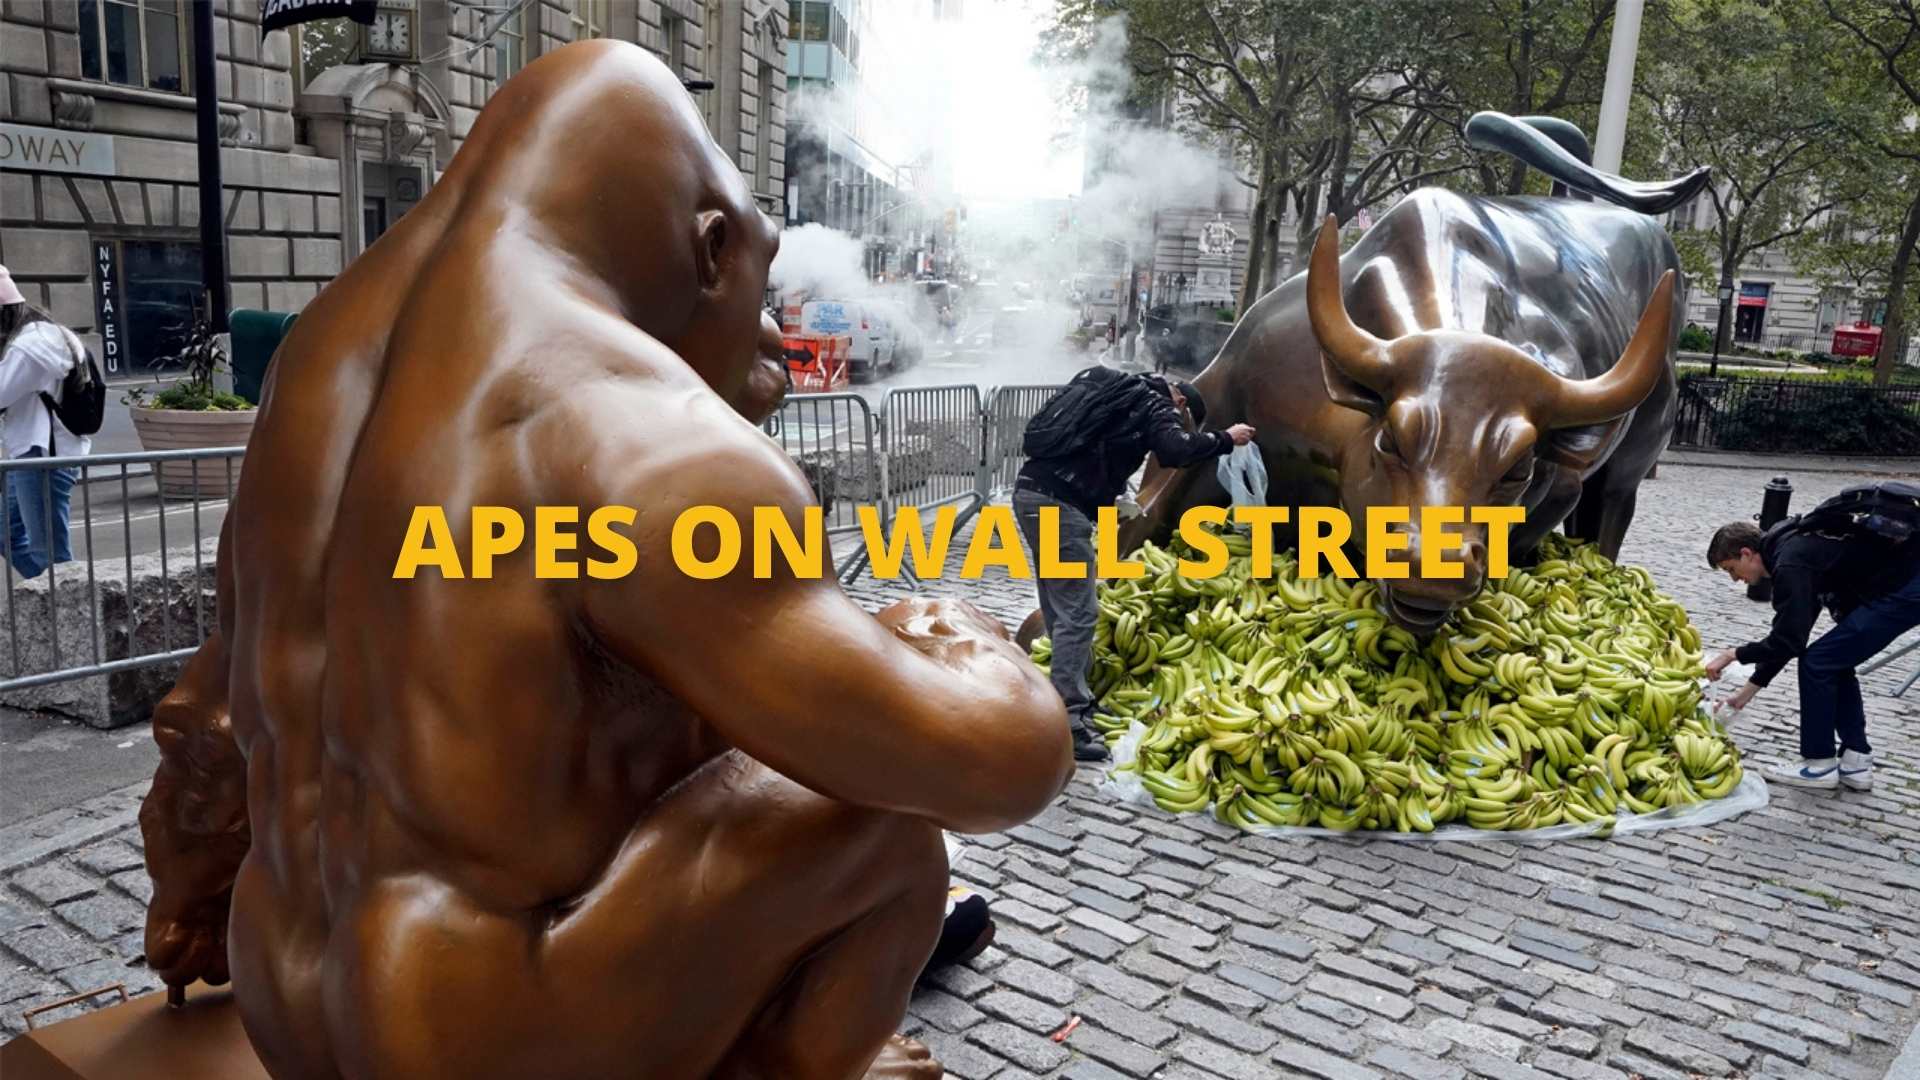 Harambe the ape appears on wall street